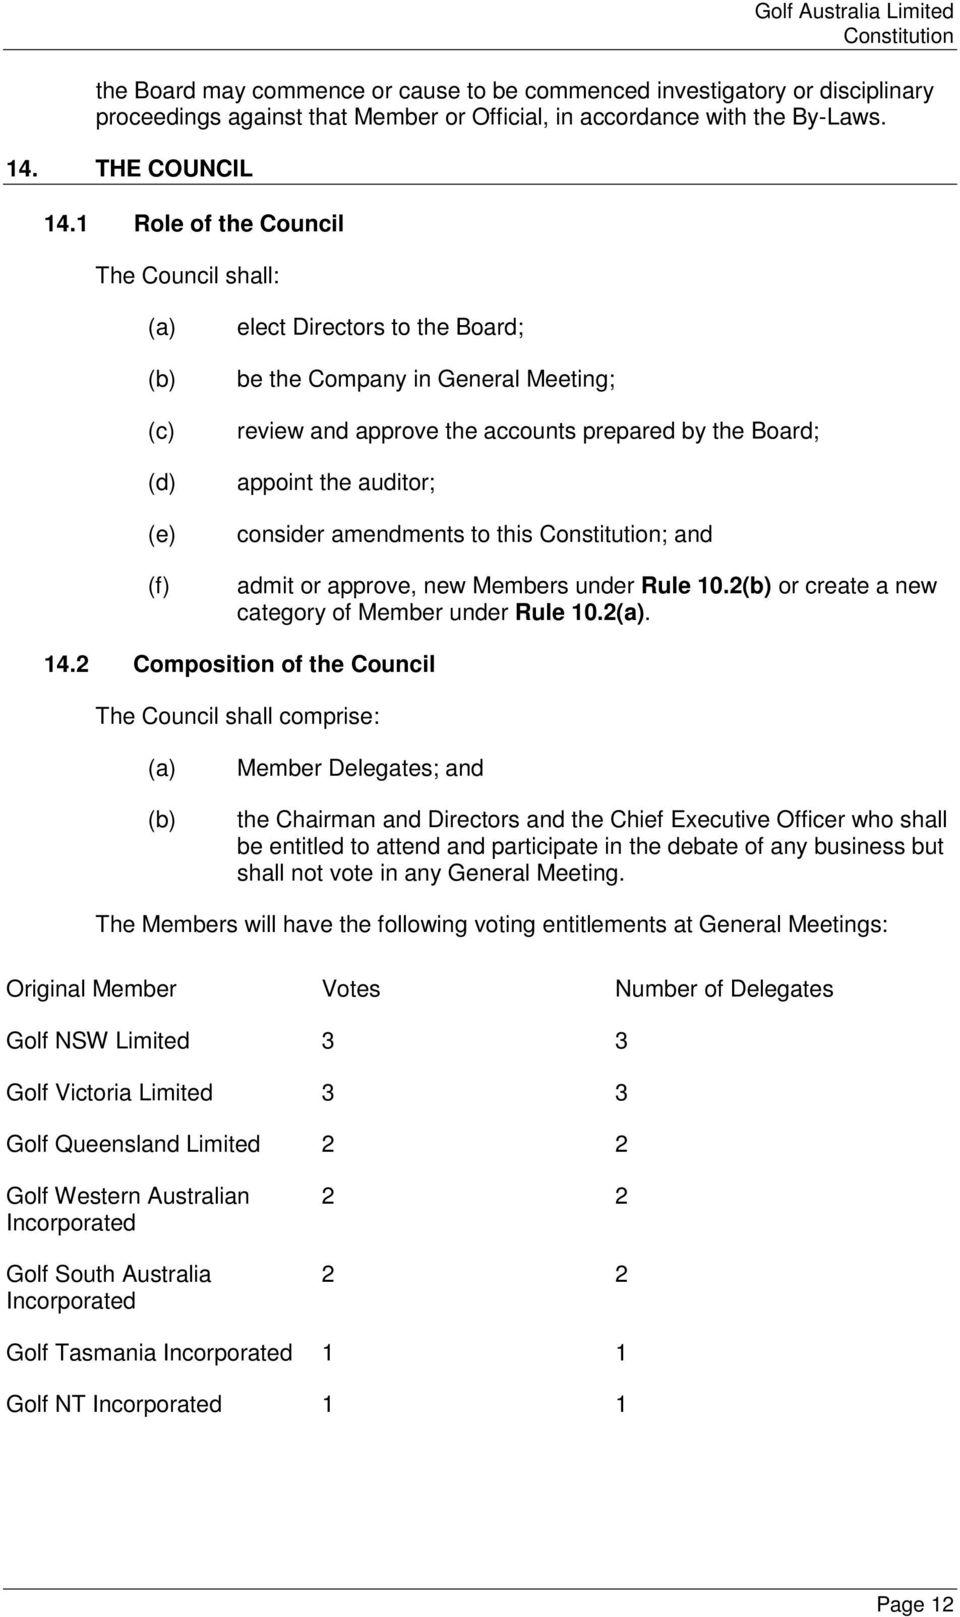 amendments to this ; and admit or approve, new Members under Rule 10.2 or create a new category of Member under Rule 10.2. 14.